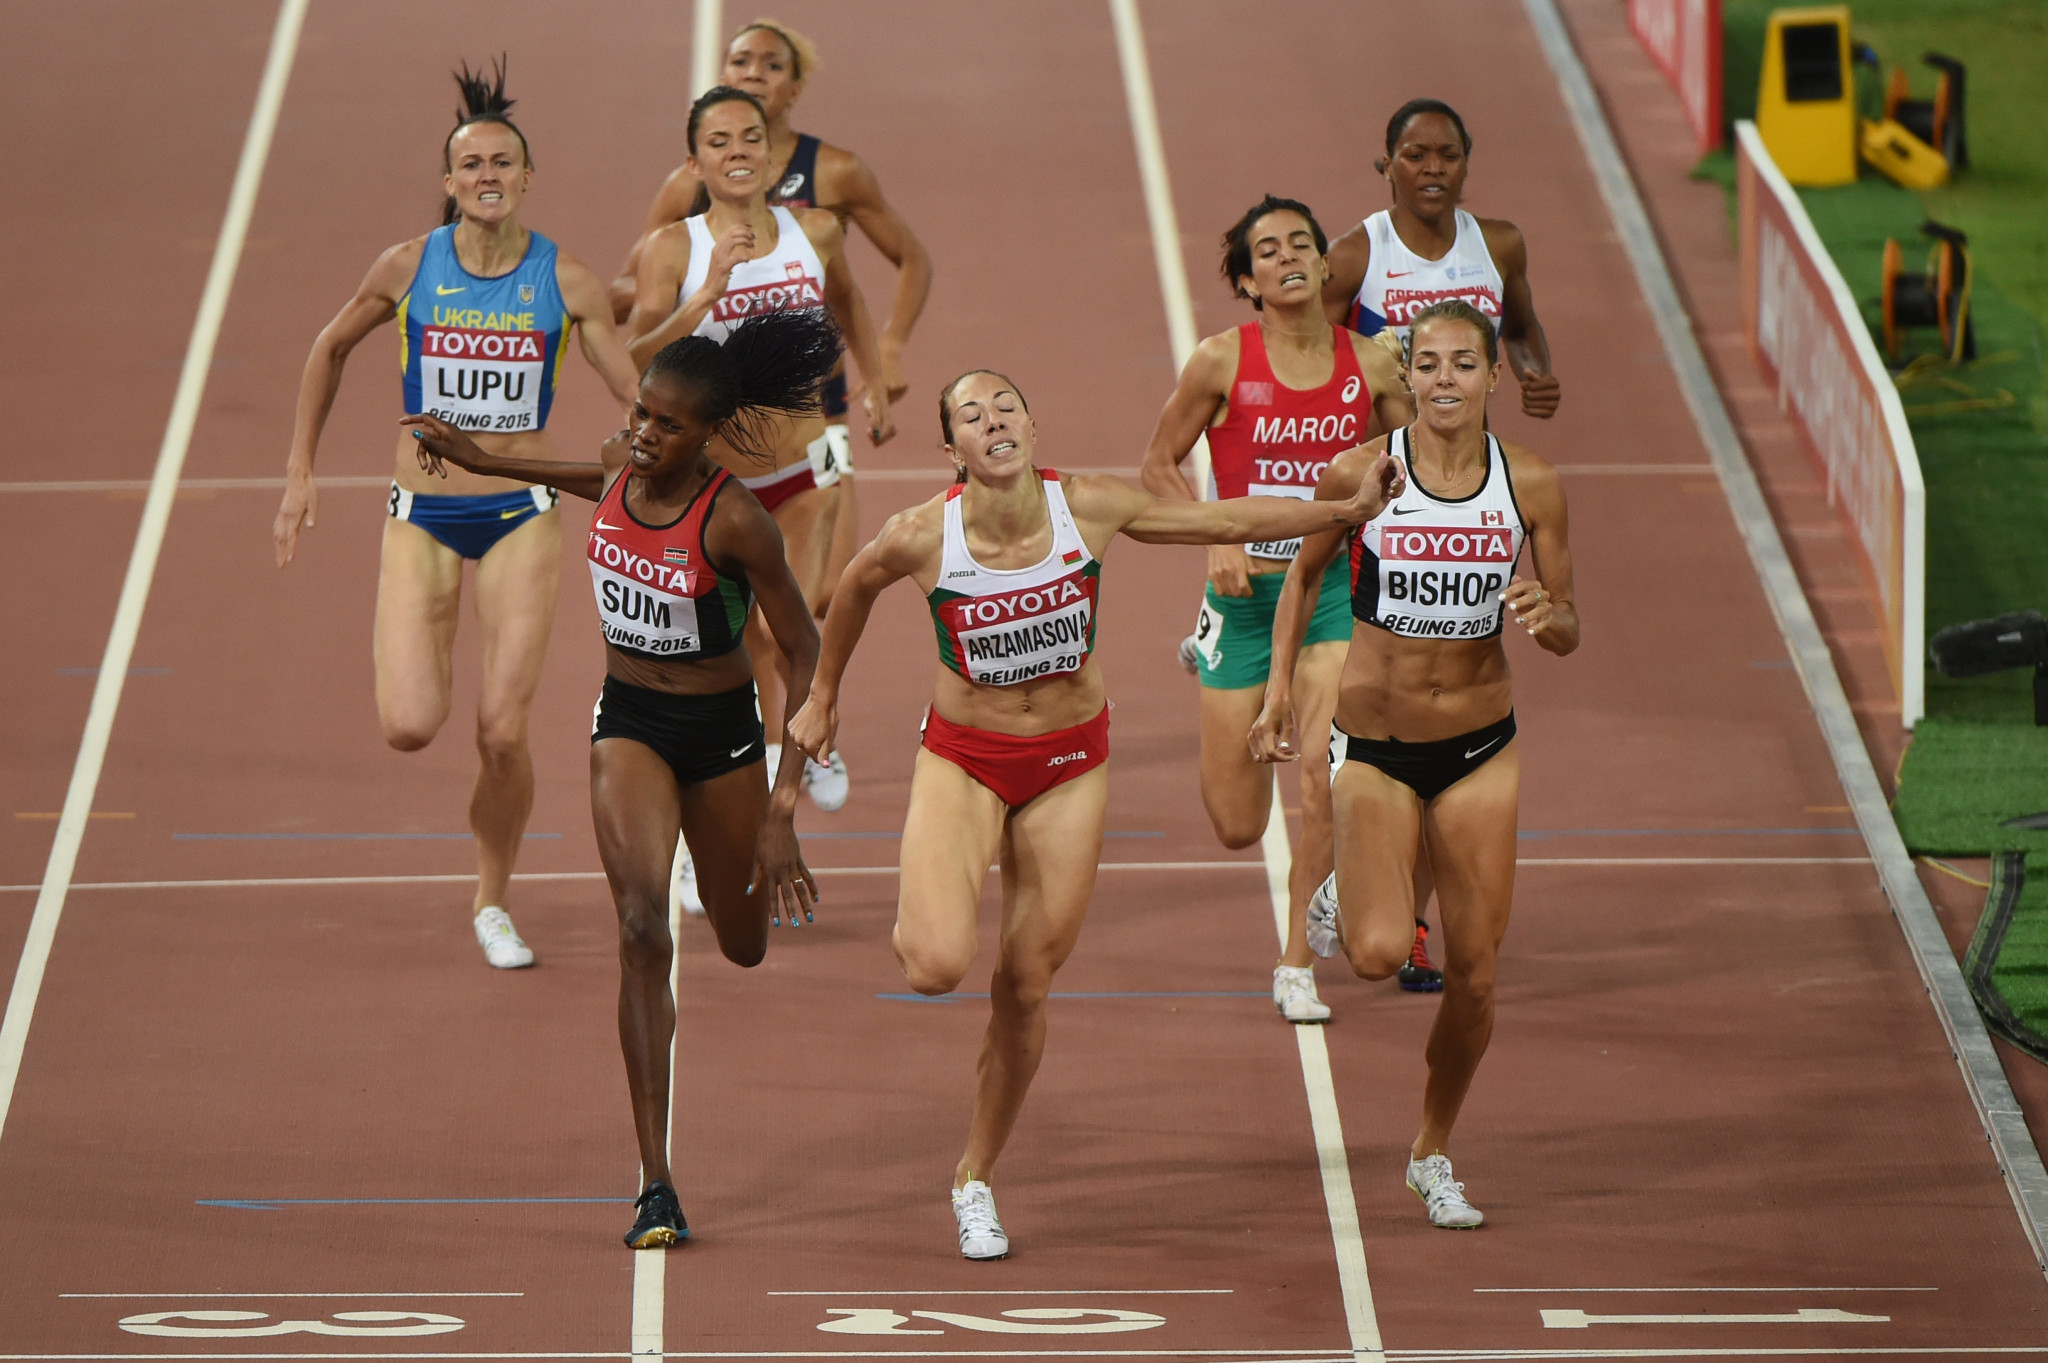 Marina Arzamasova ran a personal best to win the women's 800m world title in 2015 ©Getty Images